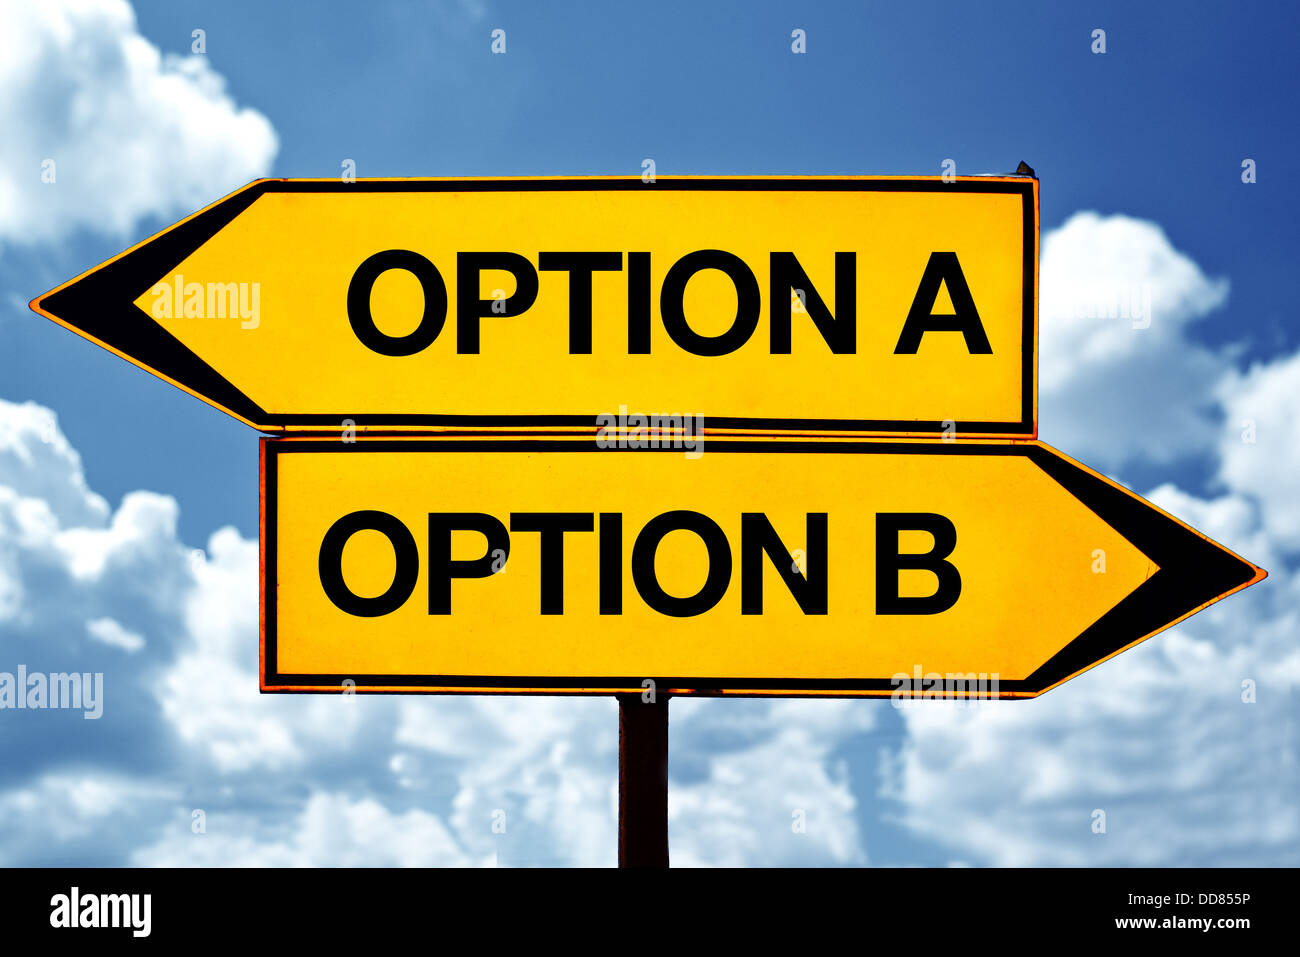 Option A or option B, opposite signs. Two opposite signs against blue sky background. Stock Photo